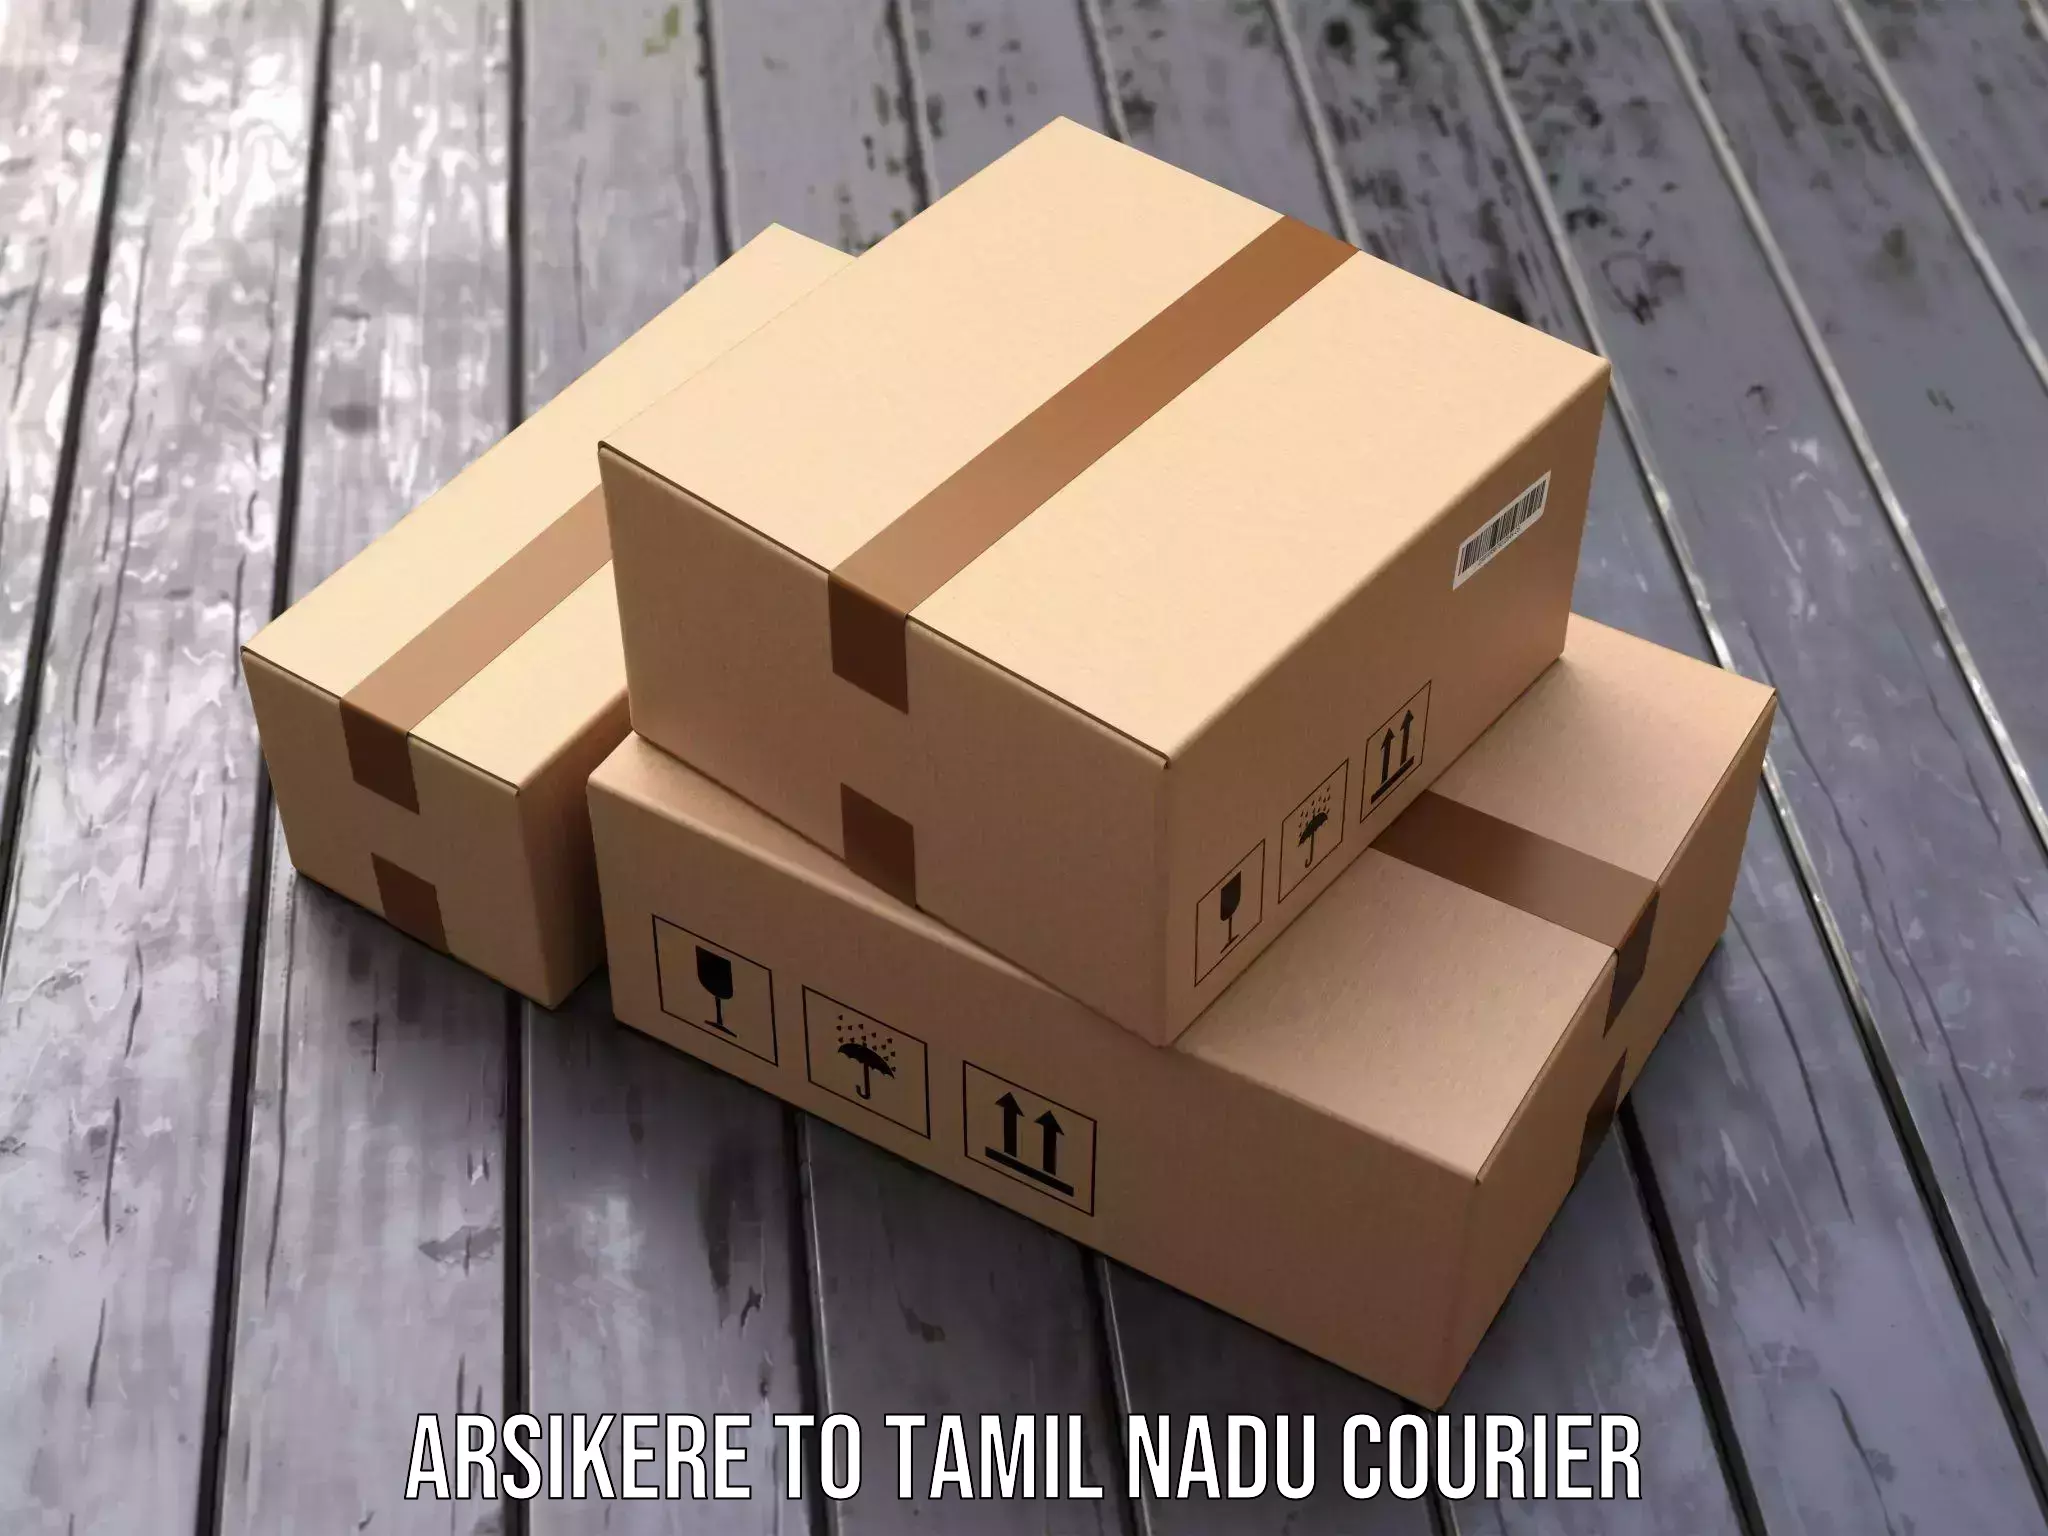 Next-day delivery options Arsikere to Tirupattur